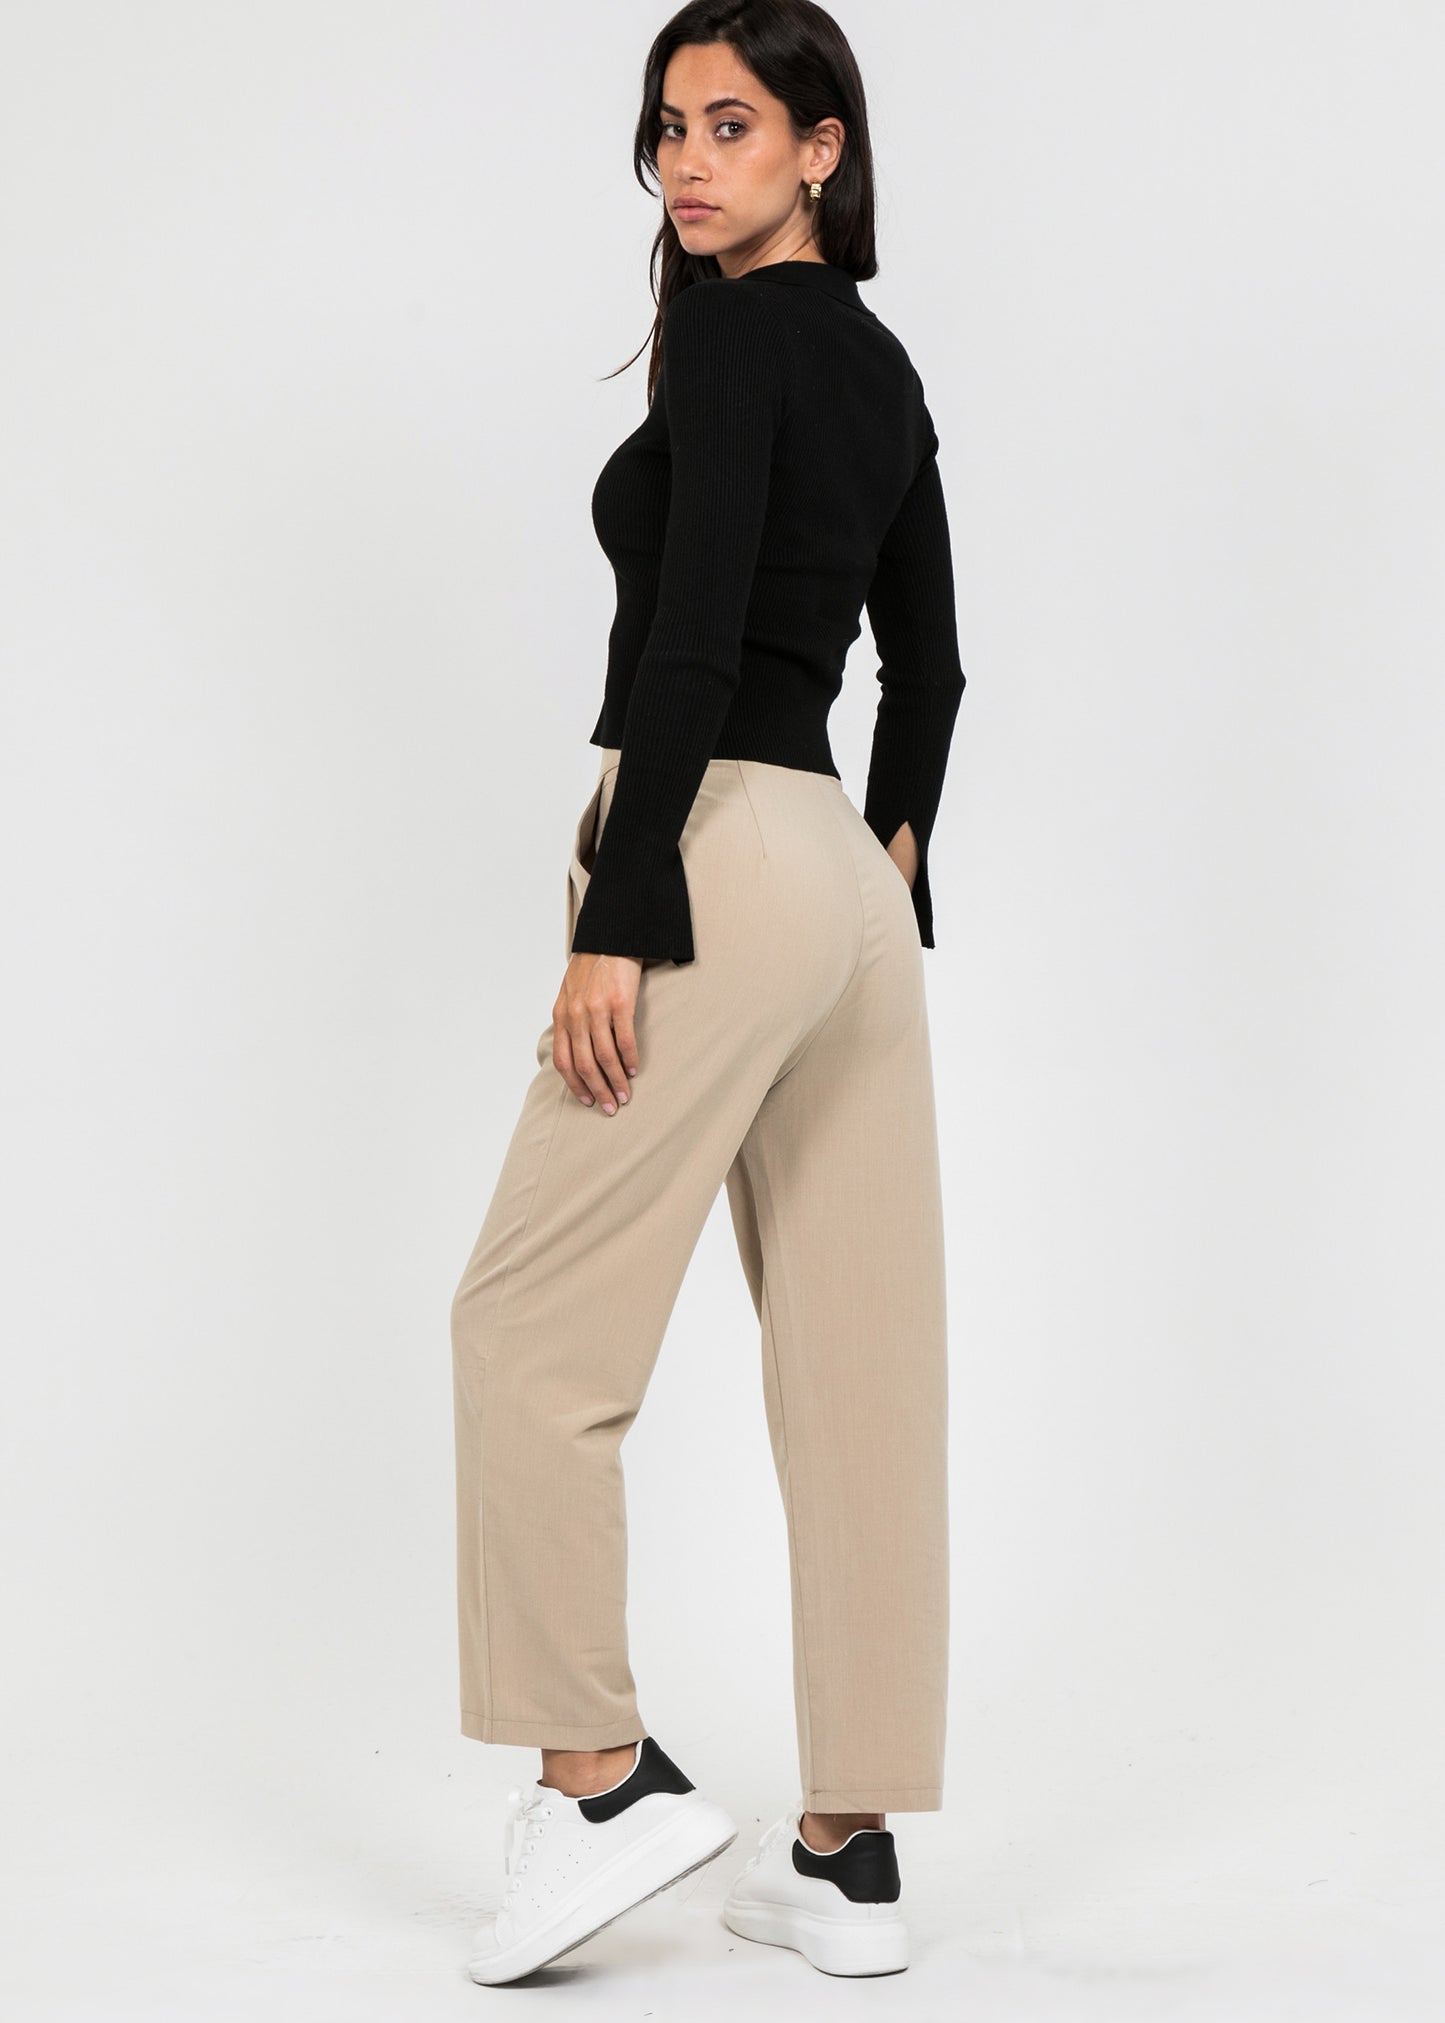 Tailored trousers in beige